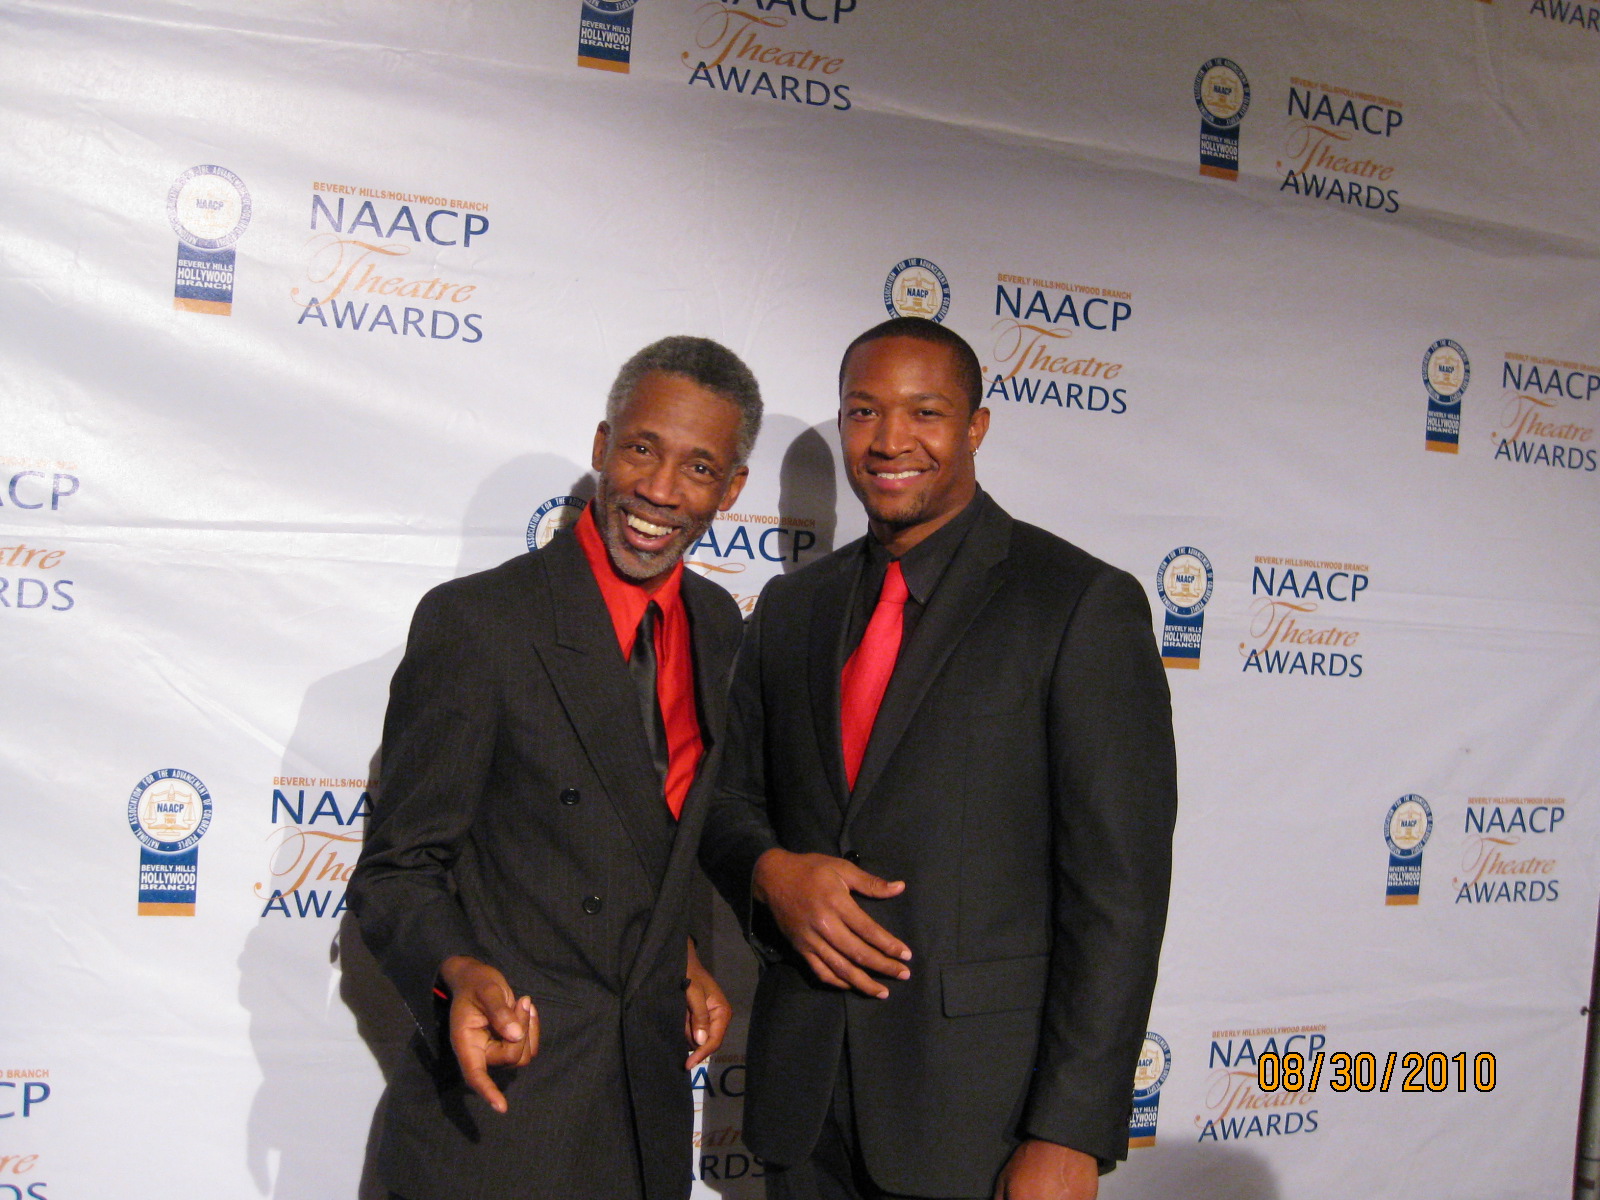 (right to left) Chester Whitmore and Phillip Marshall Tyler at the NAACP Theatre Awards